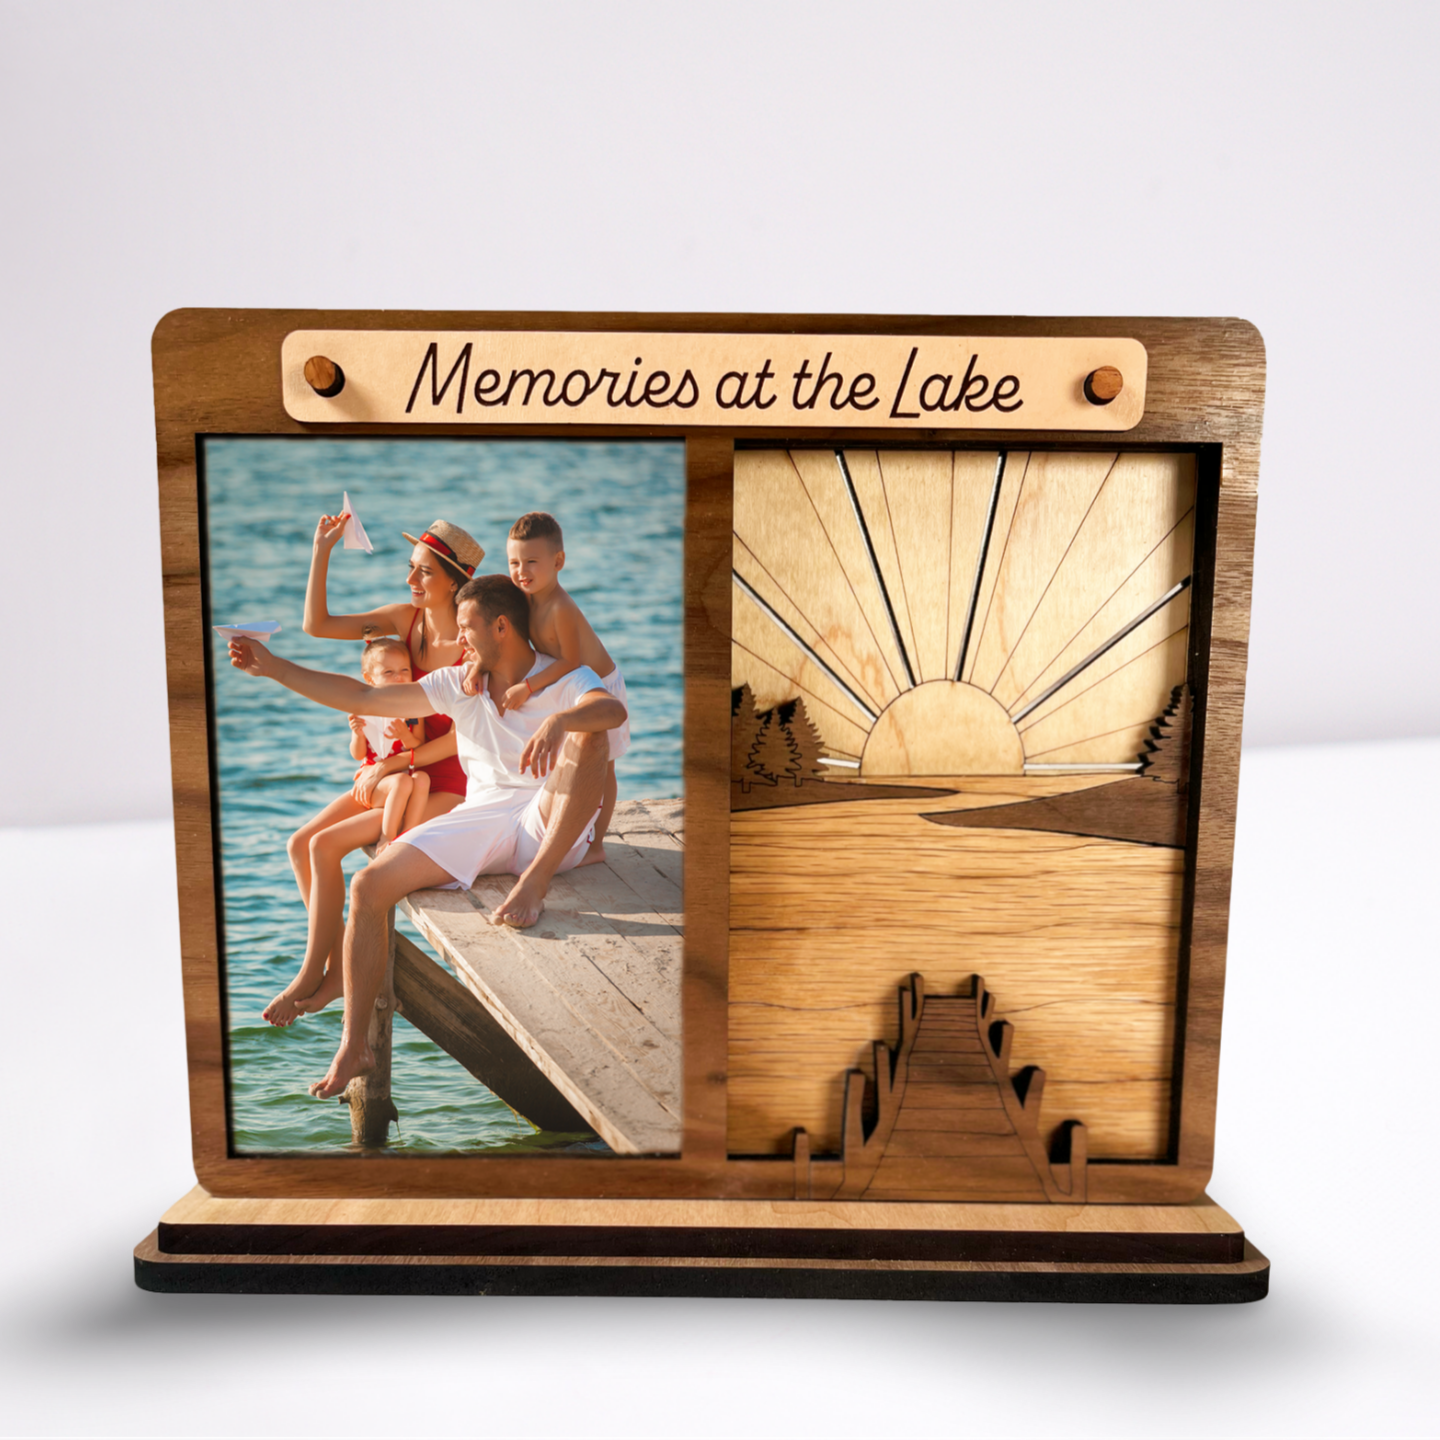 Destination Vacation Picture Frames, Wooden Memory Keeper, Perfect
Gift for Birthdays, Vacations or Christmas